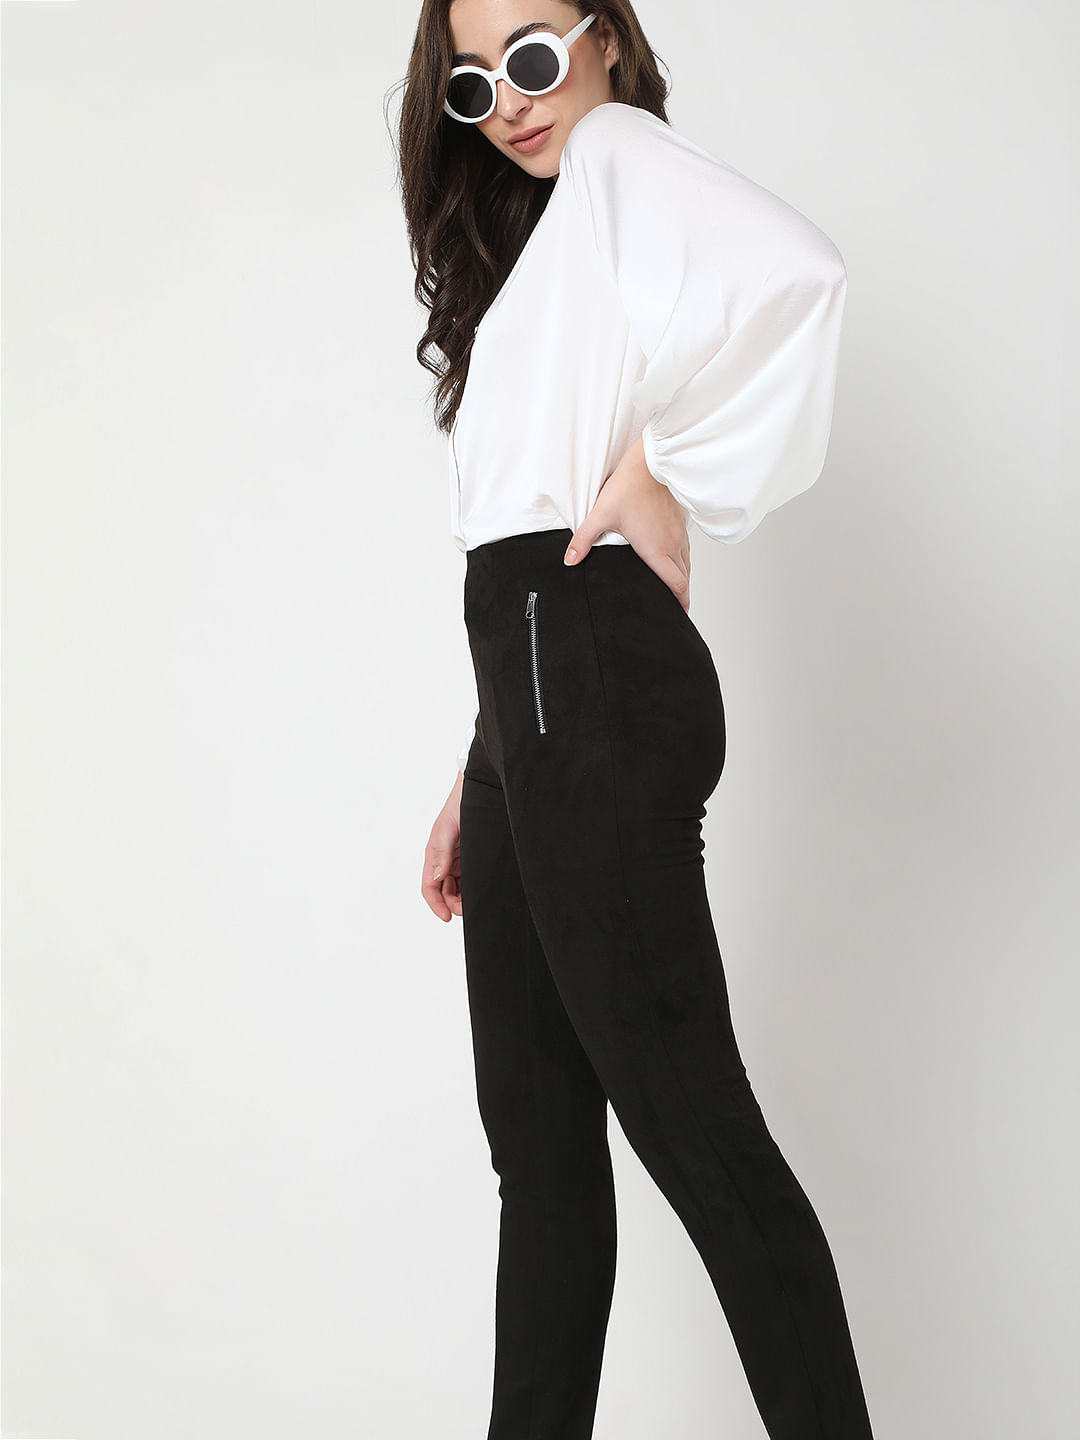 Sexy High Waist Black Leggings For Women Anti Cellulite, Skinny, Street  Style, Casual, Plus Size Female Fitness H1221 From Mengyang10, $14.29 |  DHgate.Com